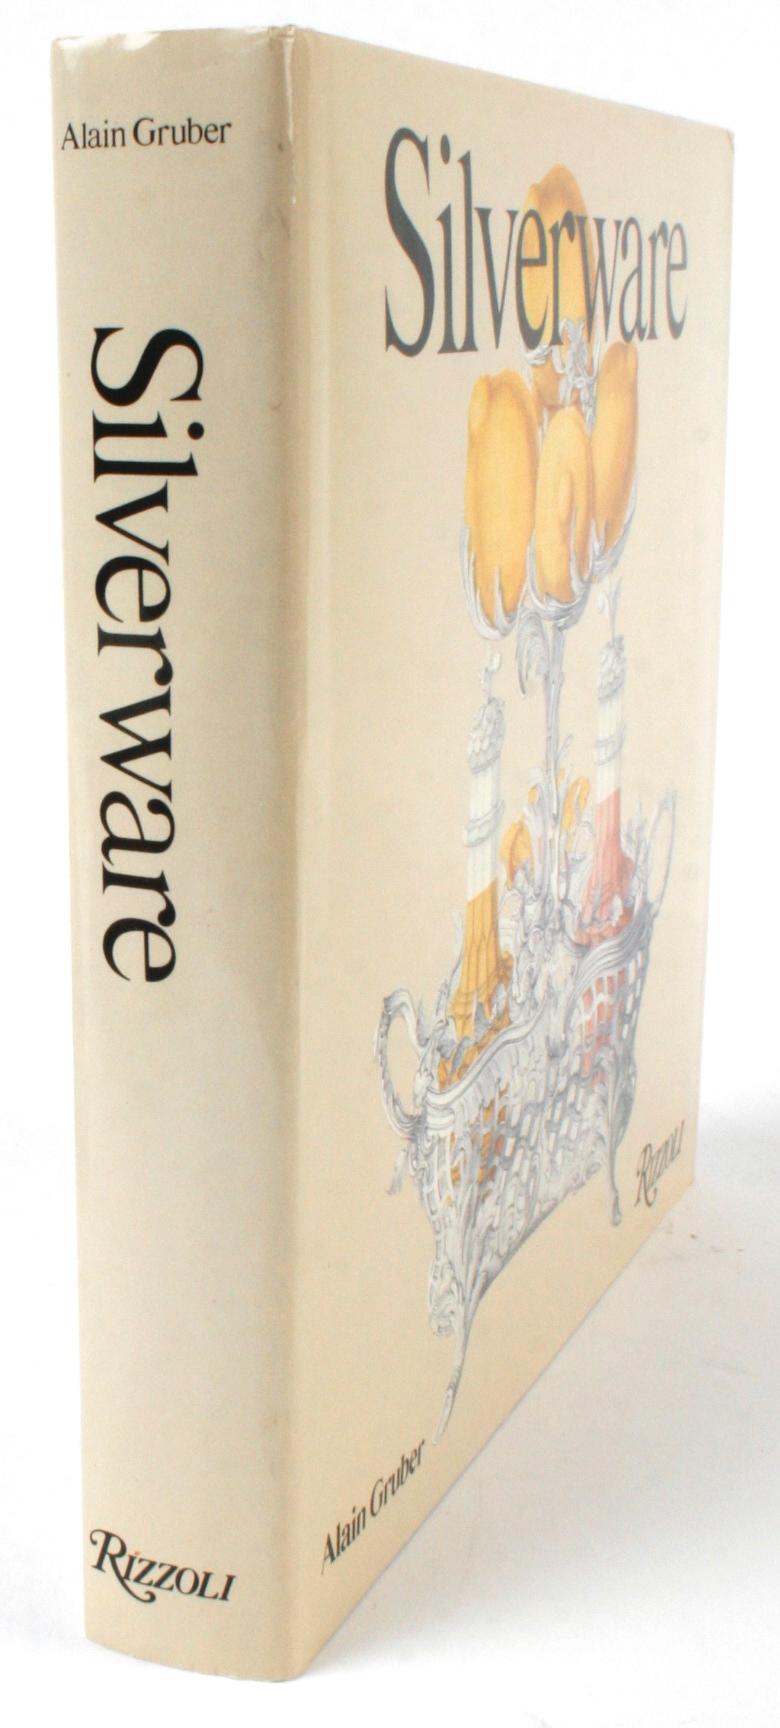 Silverware by Alain Gruber, First Edition Book 13